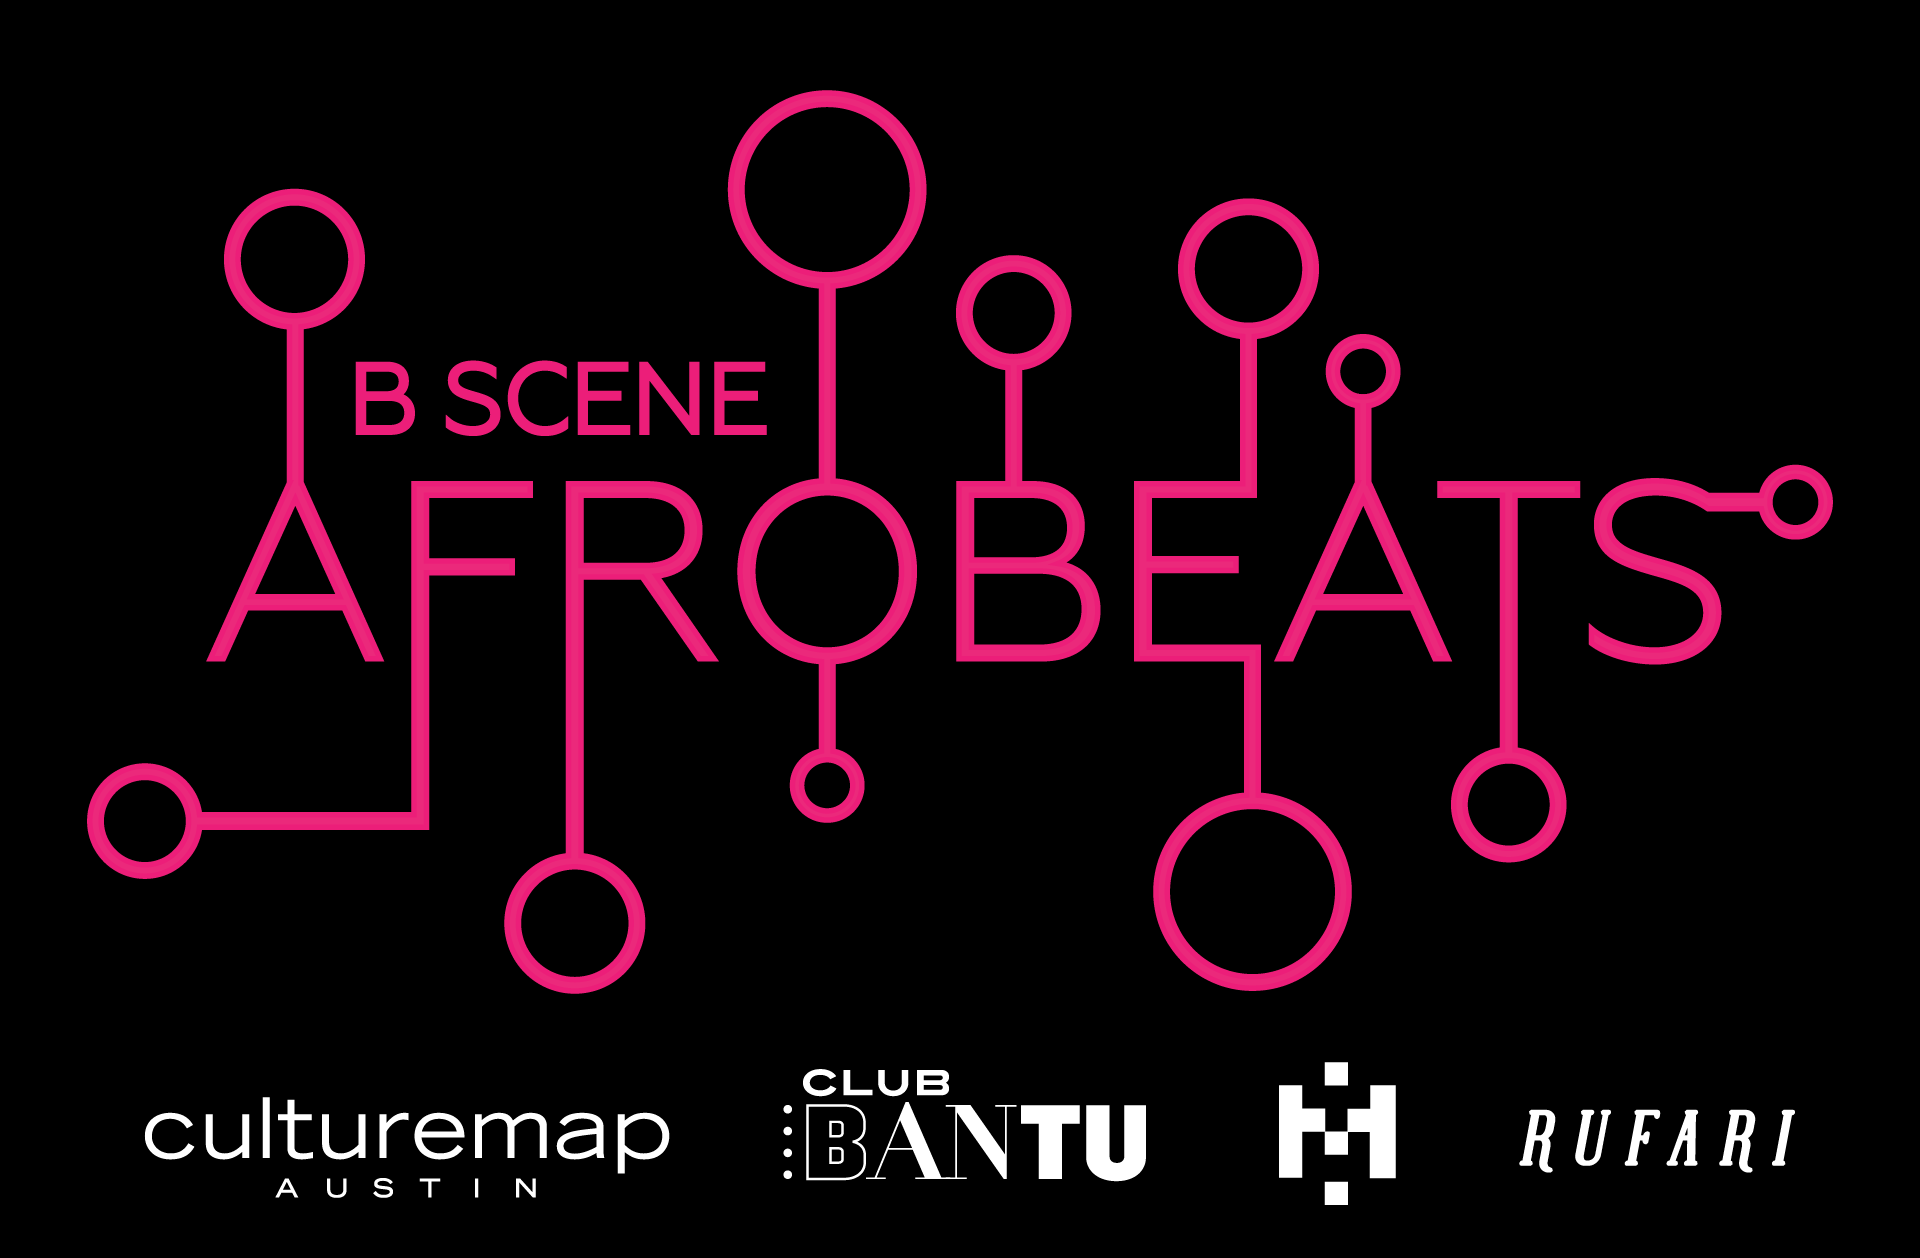 Web banner for Afrobeats B Scene event at the Blanton Museum of Art